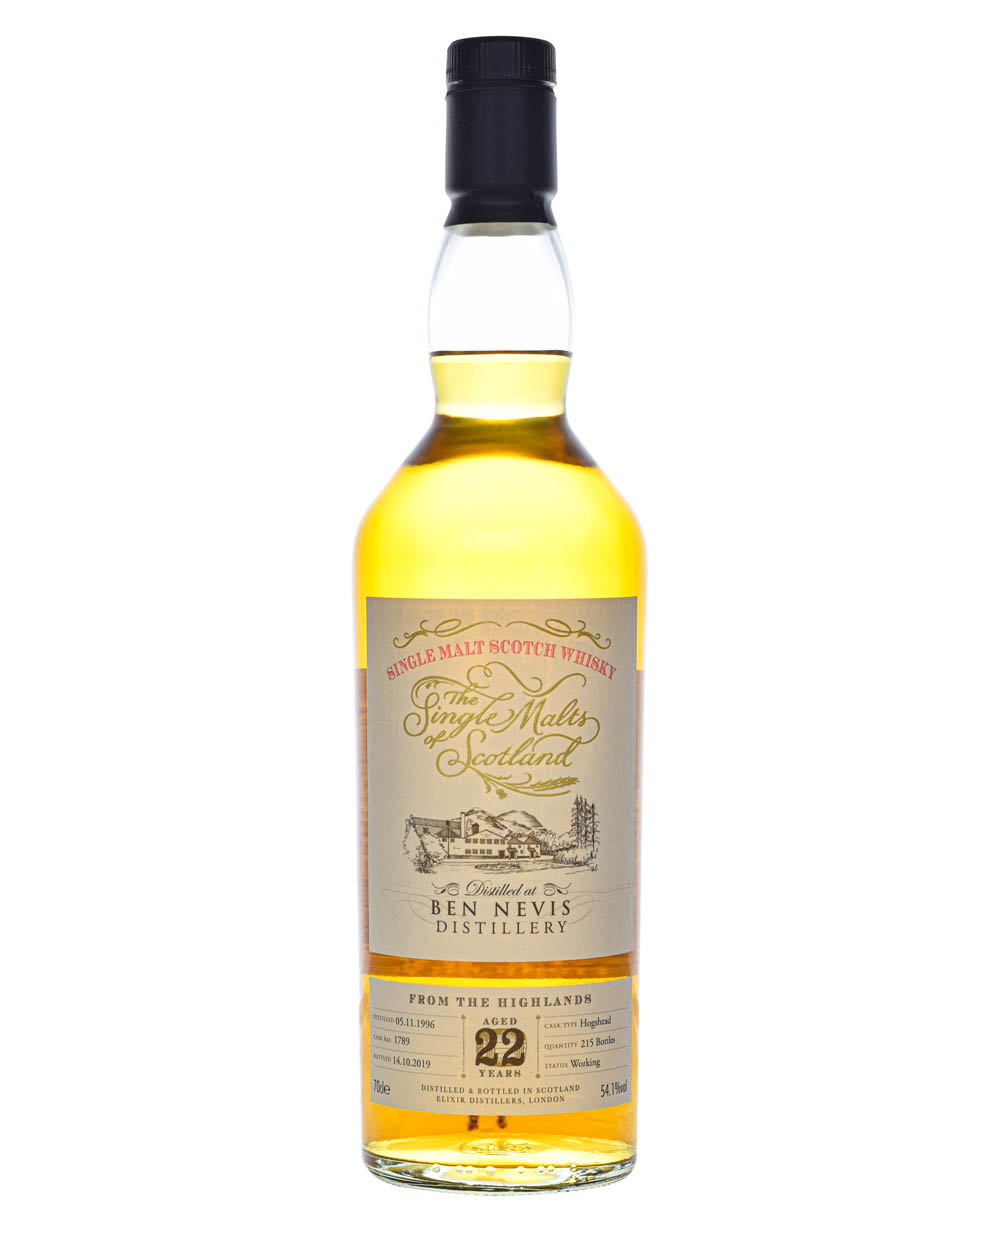 Ben Nevis 22 Years Old 1996 Cask #1789 Musthave Malts MHM